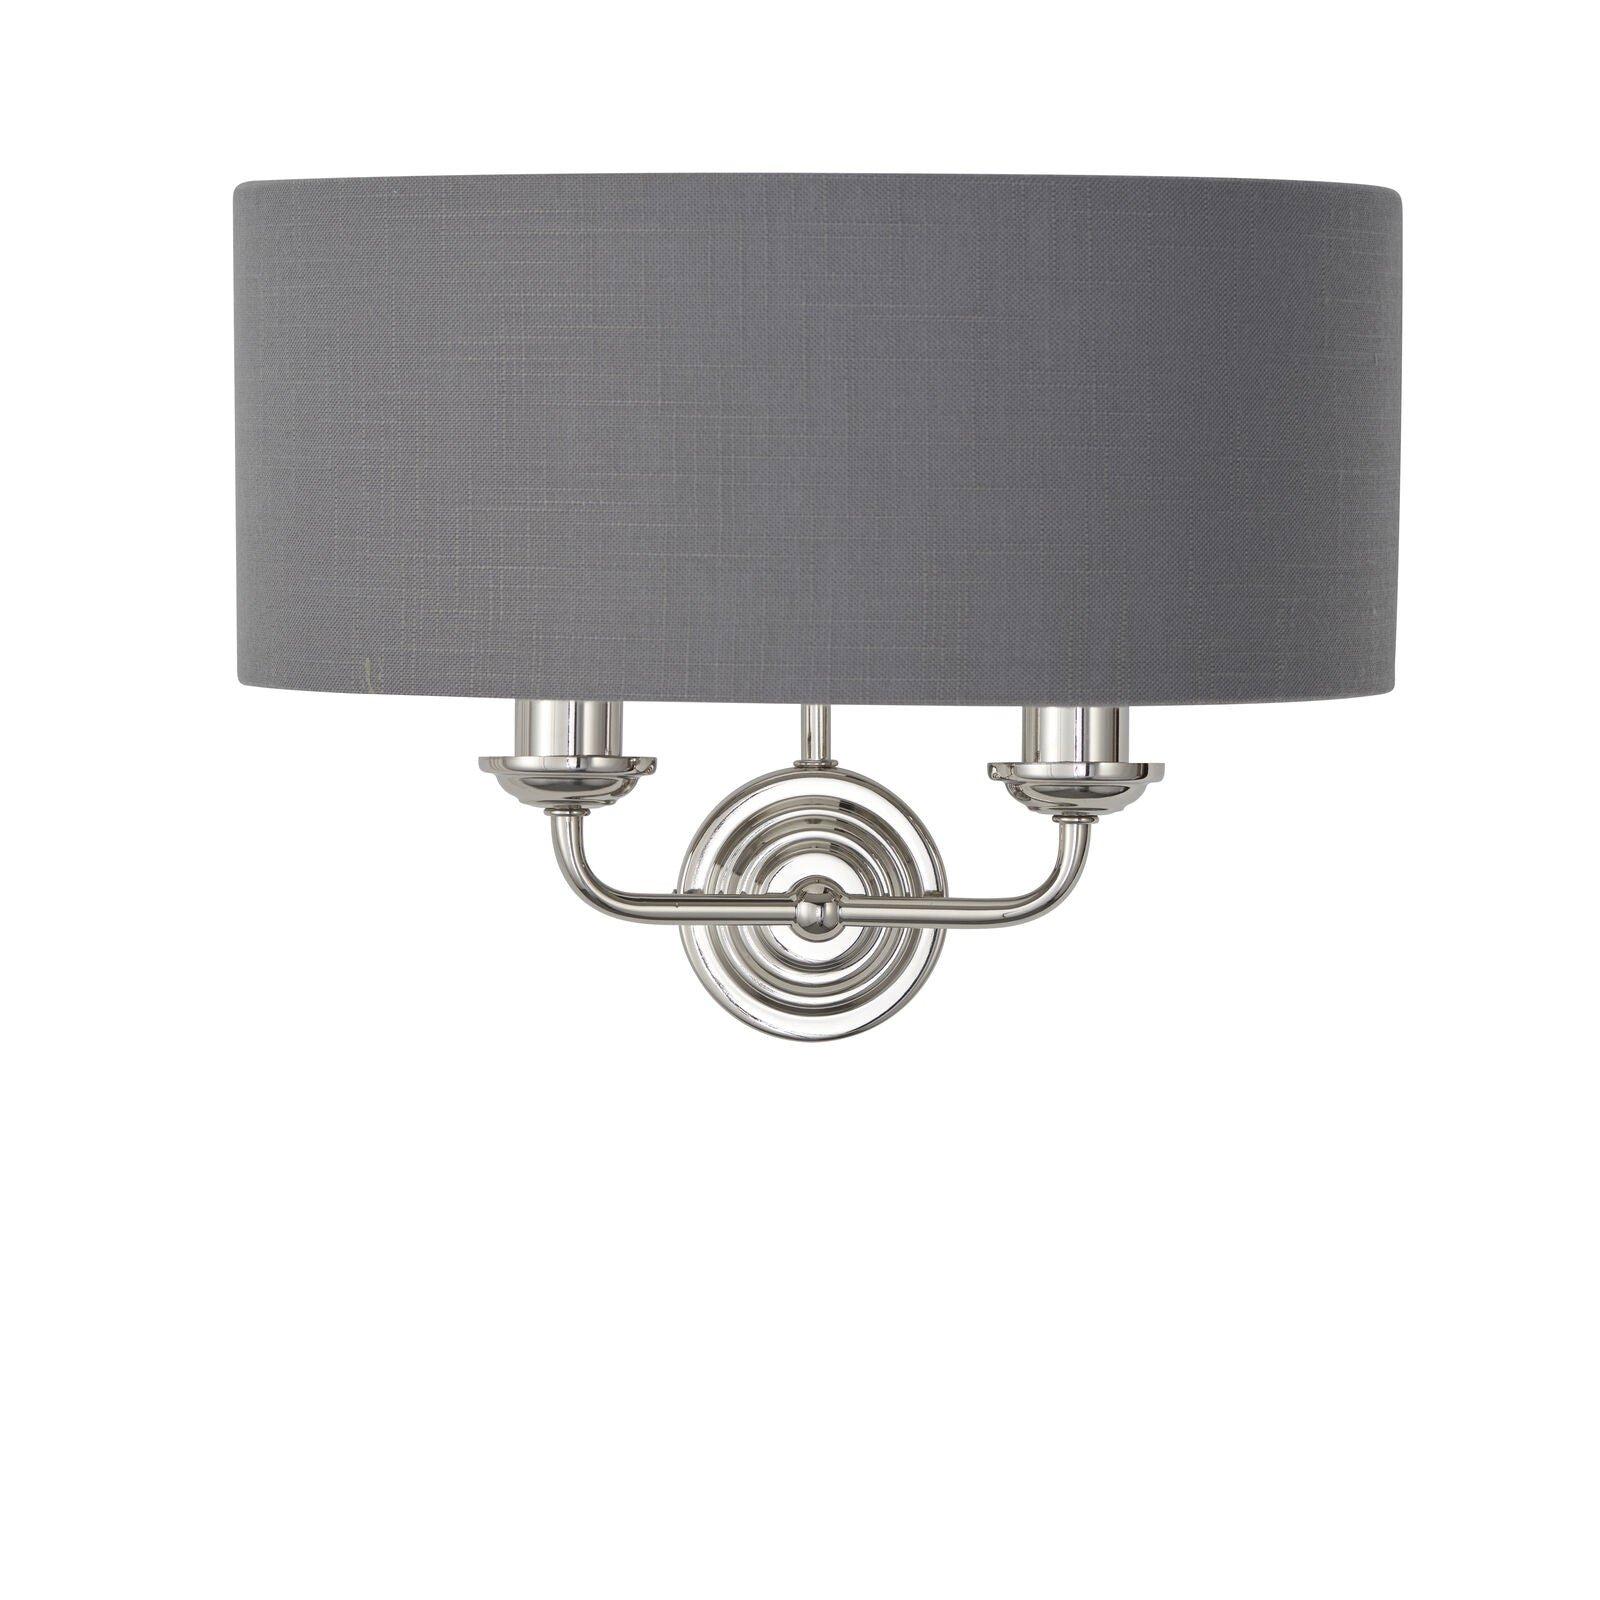 Wall Light - Bright Nickel Plate & Charcoal Fabric - 2 x 40W E14 - Dimmable